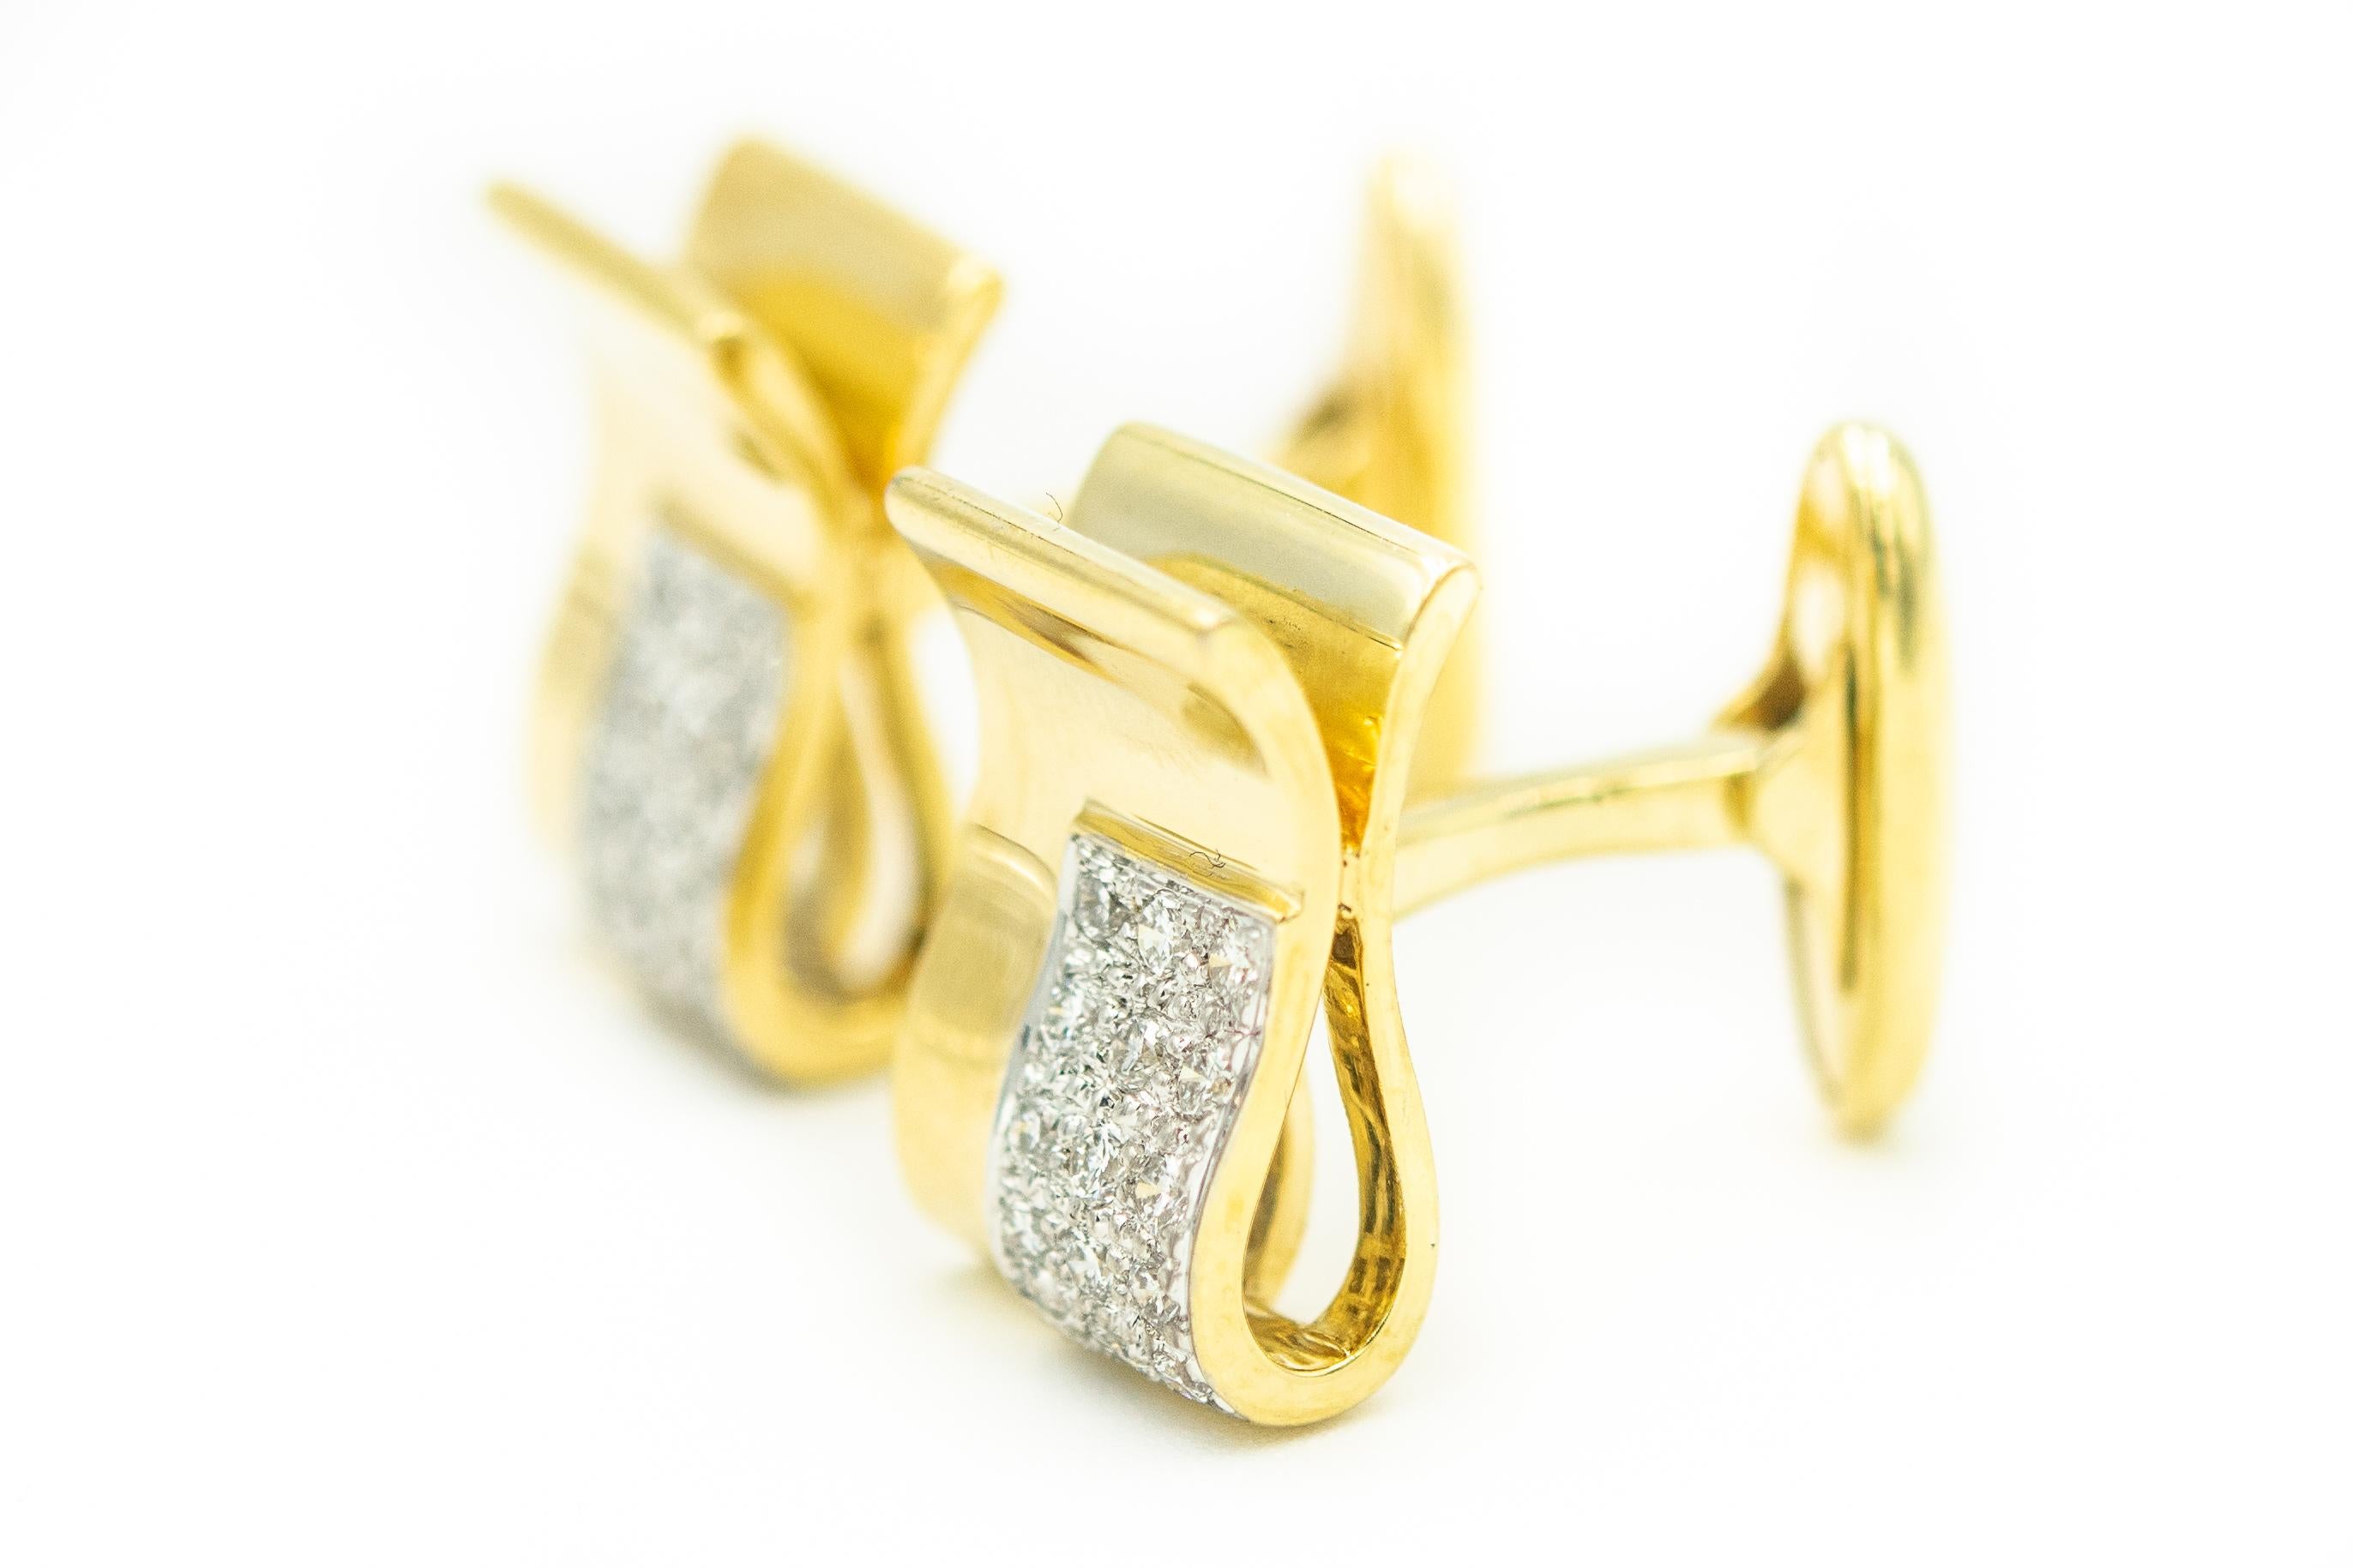 Elegant three dimensional rectangular 18k yellow gold and diamond cufflinks featuring 15 bead set diamonds in each cufflink.  The diamonds are set in white gold to give the cufflinks more contrast.  The backs are a 